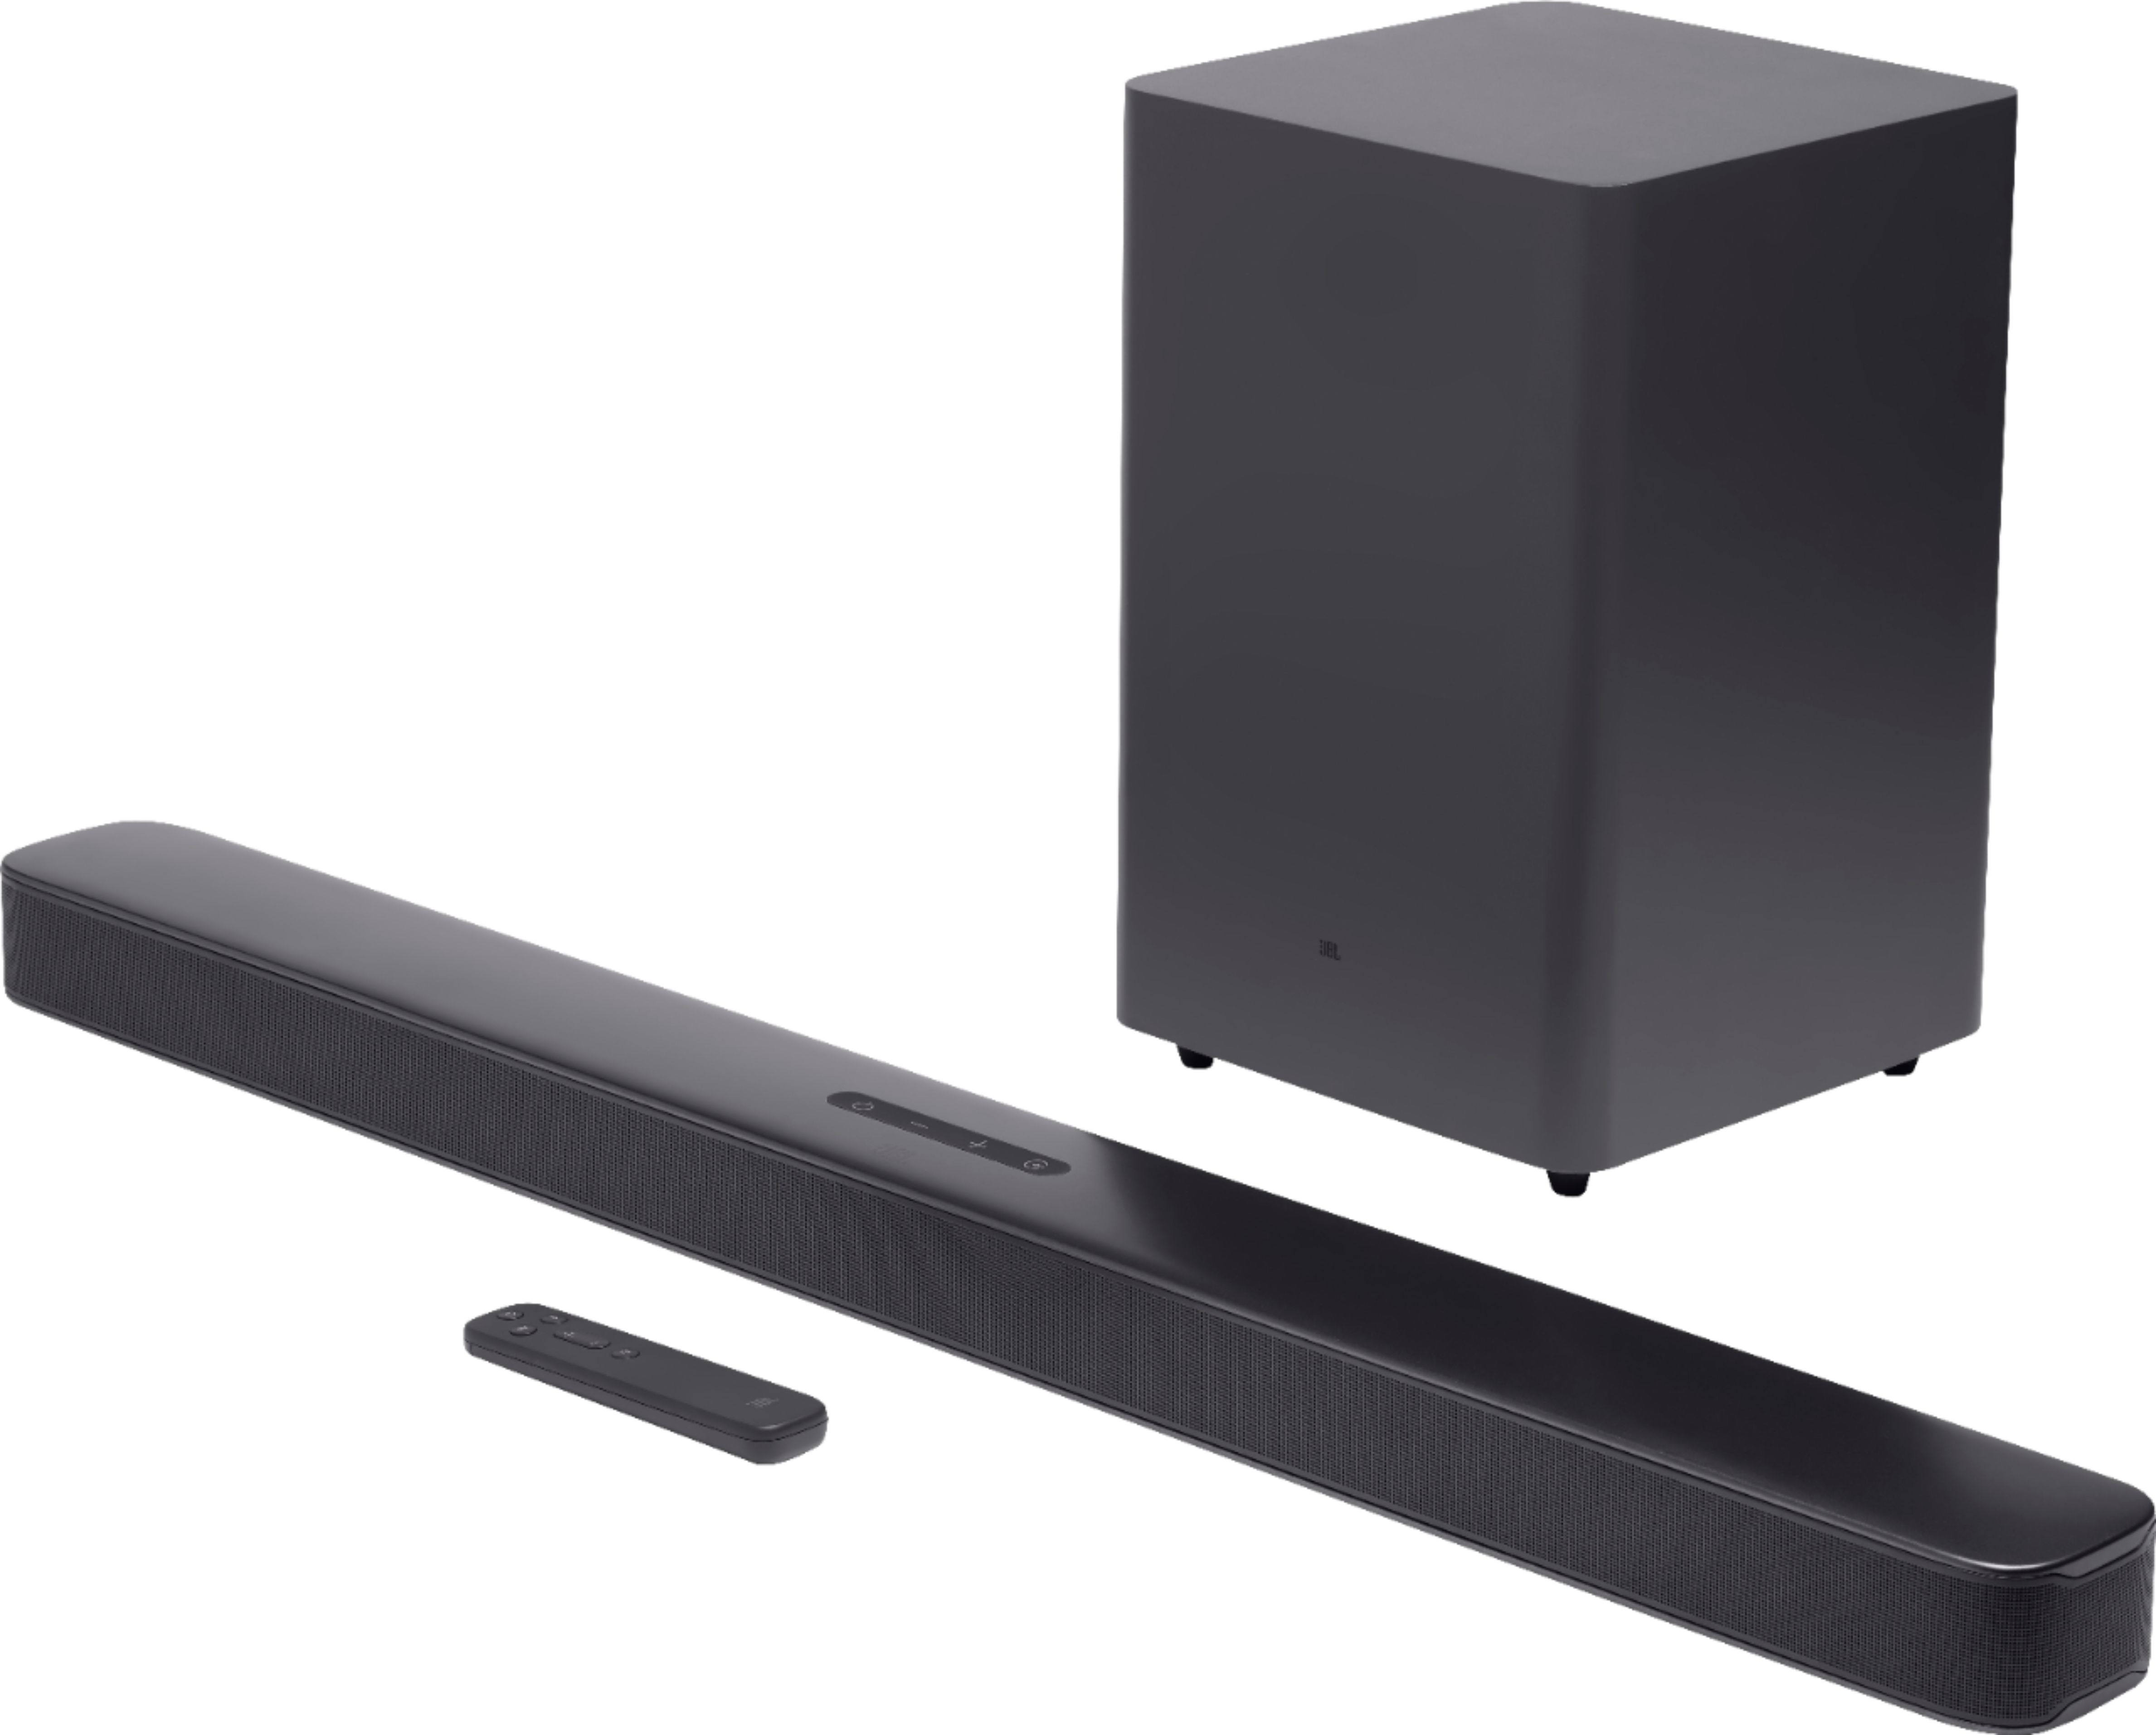 LG 2.1-Channel Soundbar with Wireless Subwoofer and DTS Virtual:X Black  SN4A - Best Buy